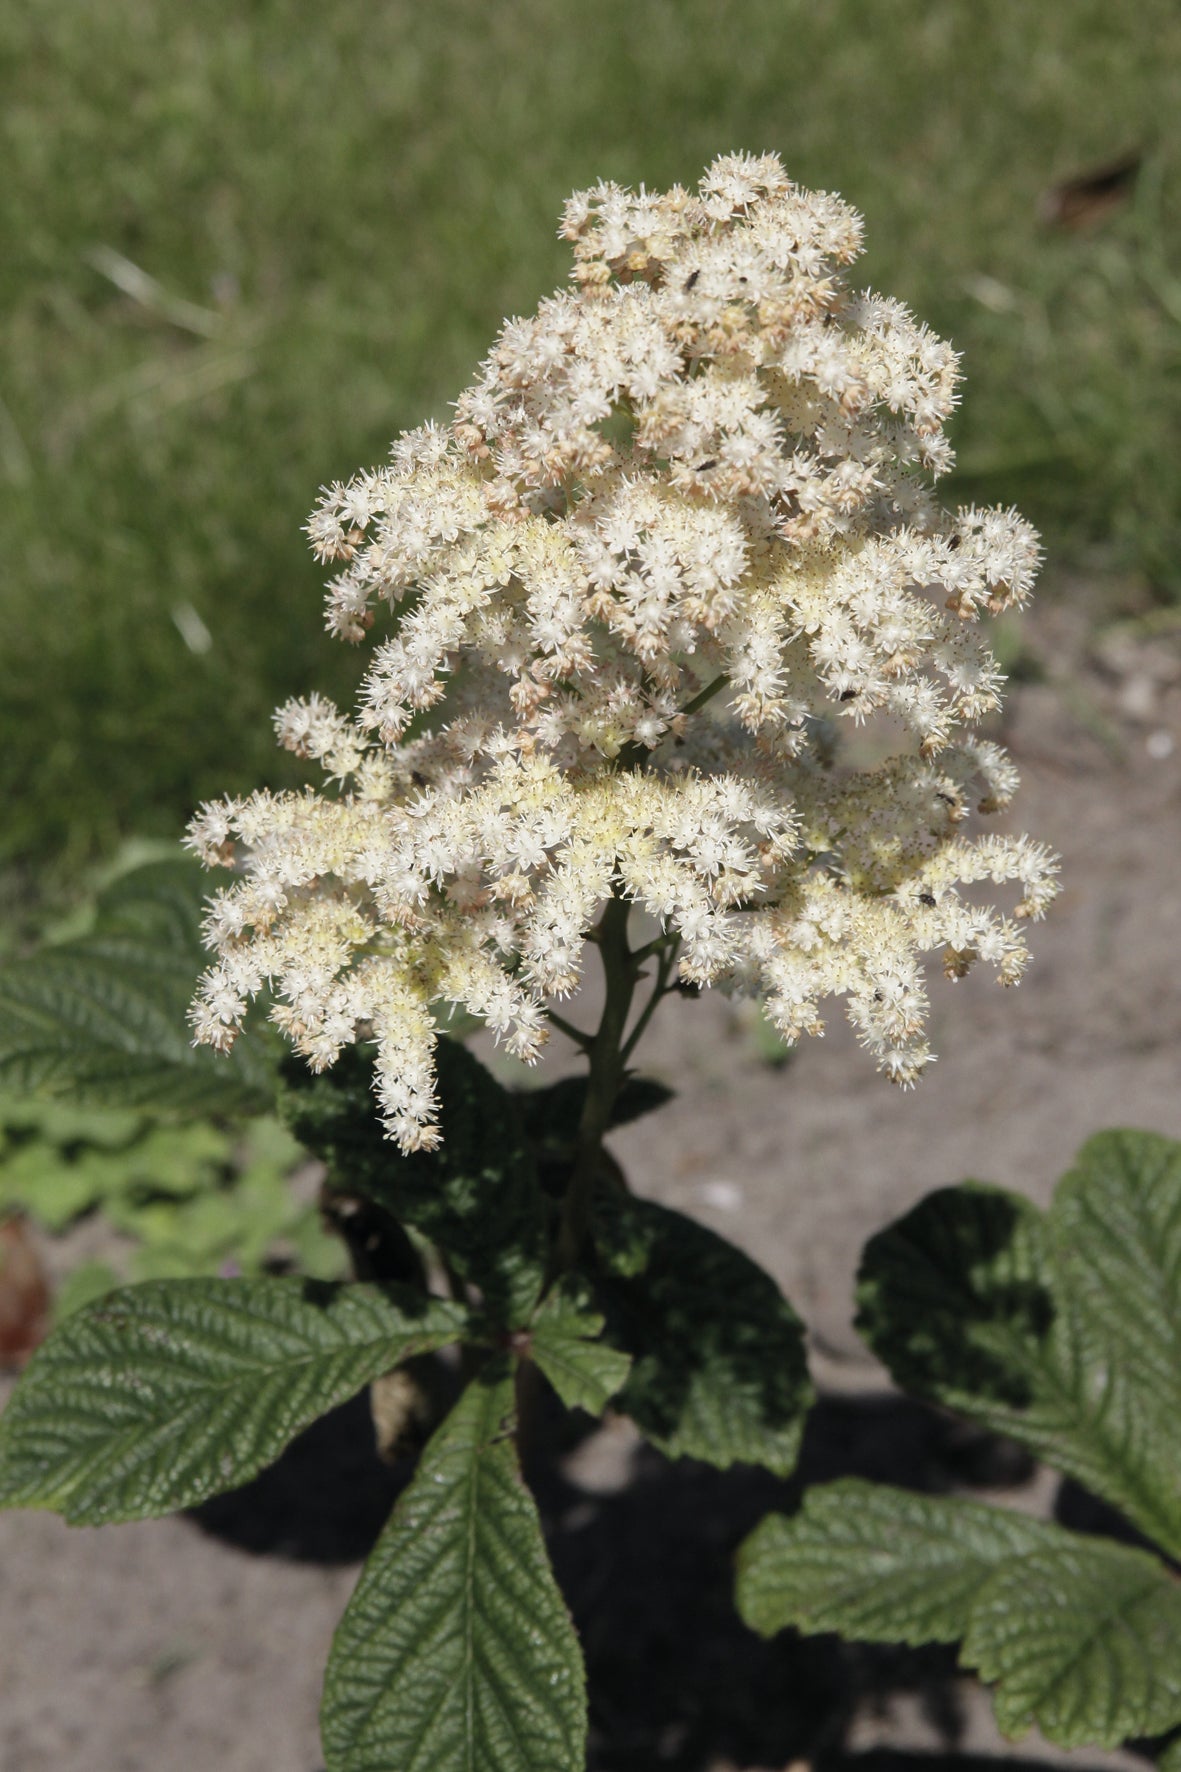 Rodgersia aesculifolia Rodgers Flower Image Credit: Ball Horticulture Company